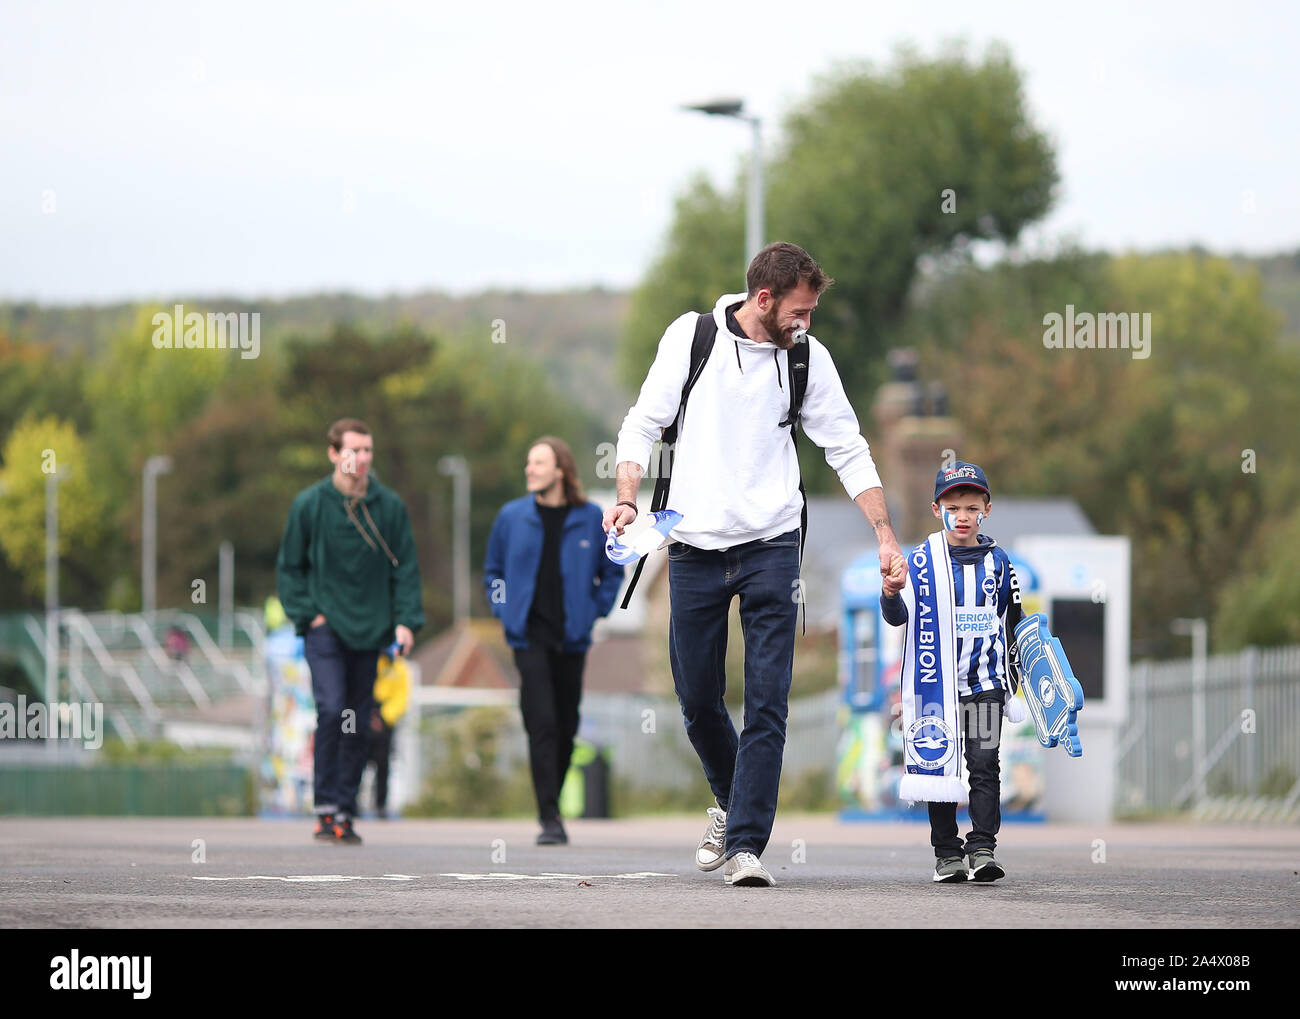 Fans arrive at the stadium for the English Premier League soccer match between Brighton & Hove Albion and Tottenham Hotspur at the Amex Stadium in Brighton, Britain 5 October 2019  EDITORIAL USE ONLY. No use with unauthorized audio, video, data, fixture lists, club/league logos or 'live' services. Online in-match use limited to 120 images, no video emulation. No use in betting, games or single club/league/player publications. Stock Photo